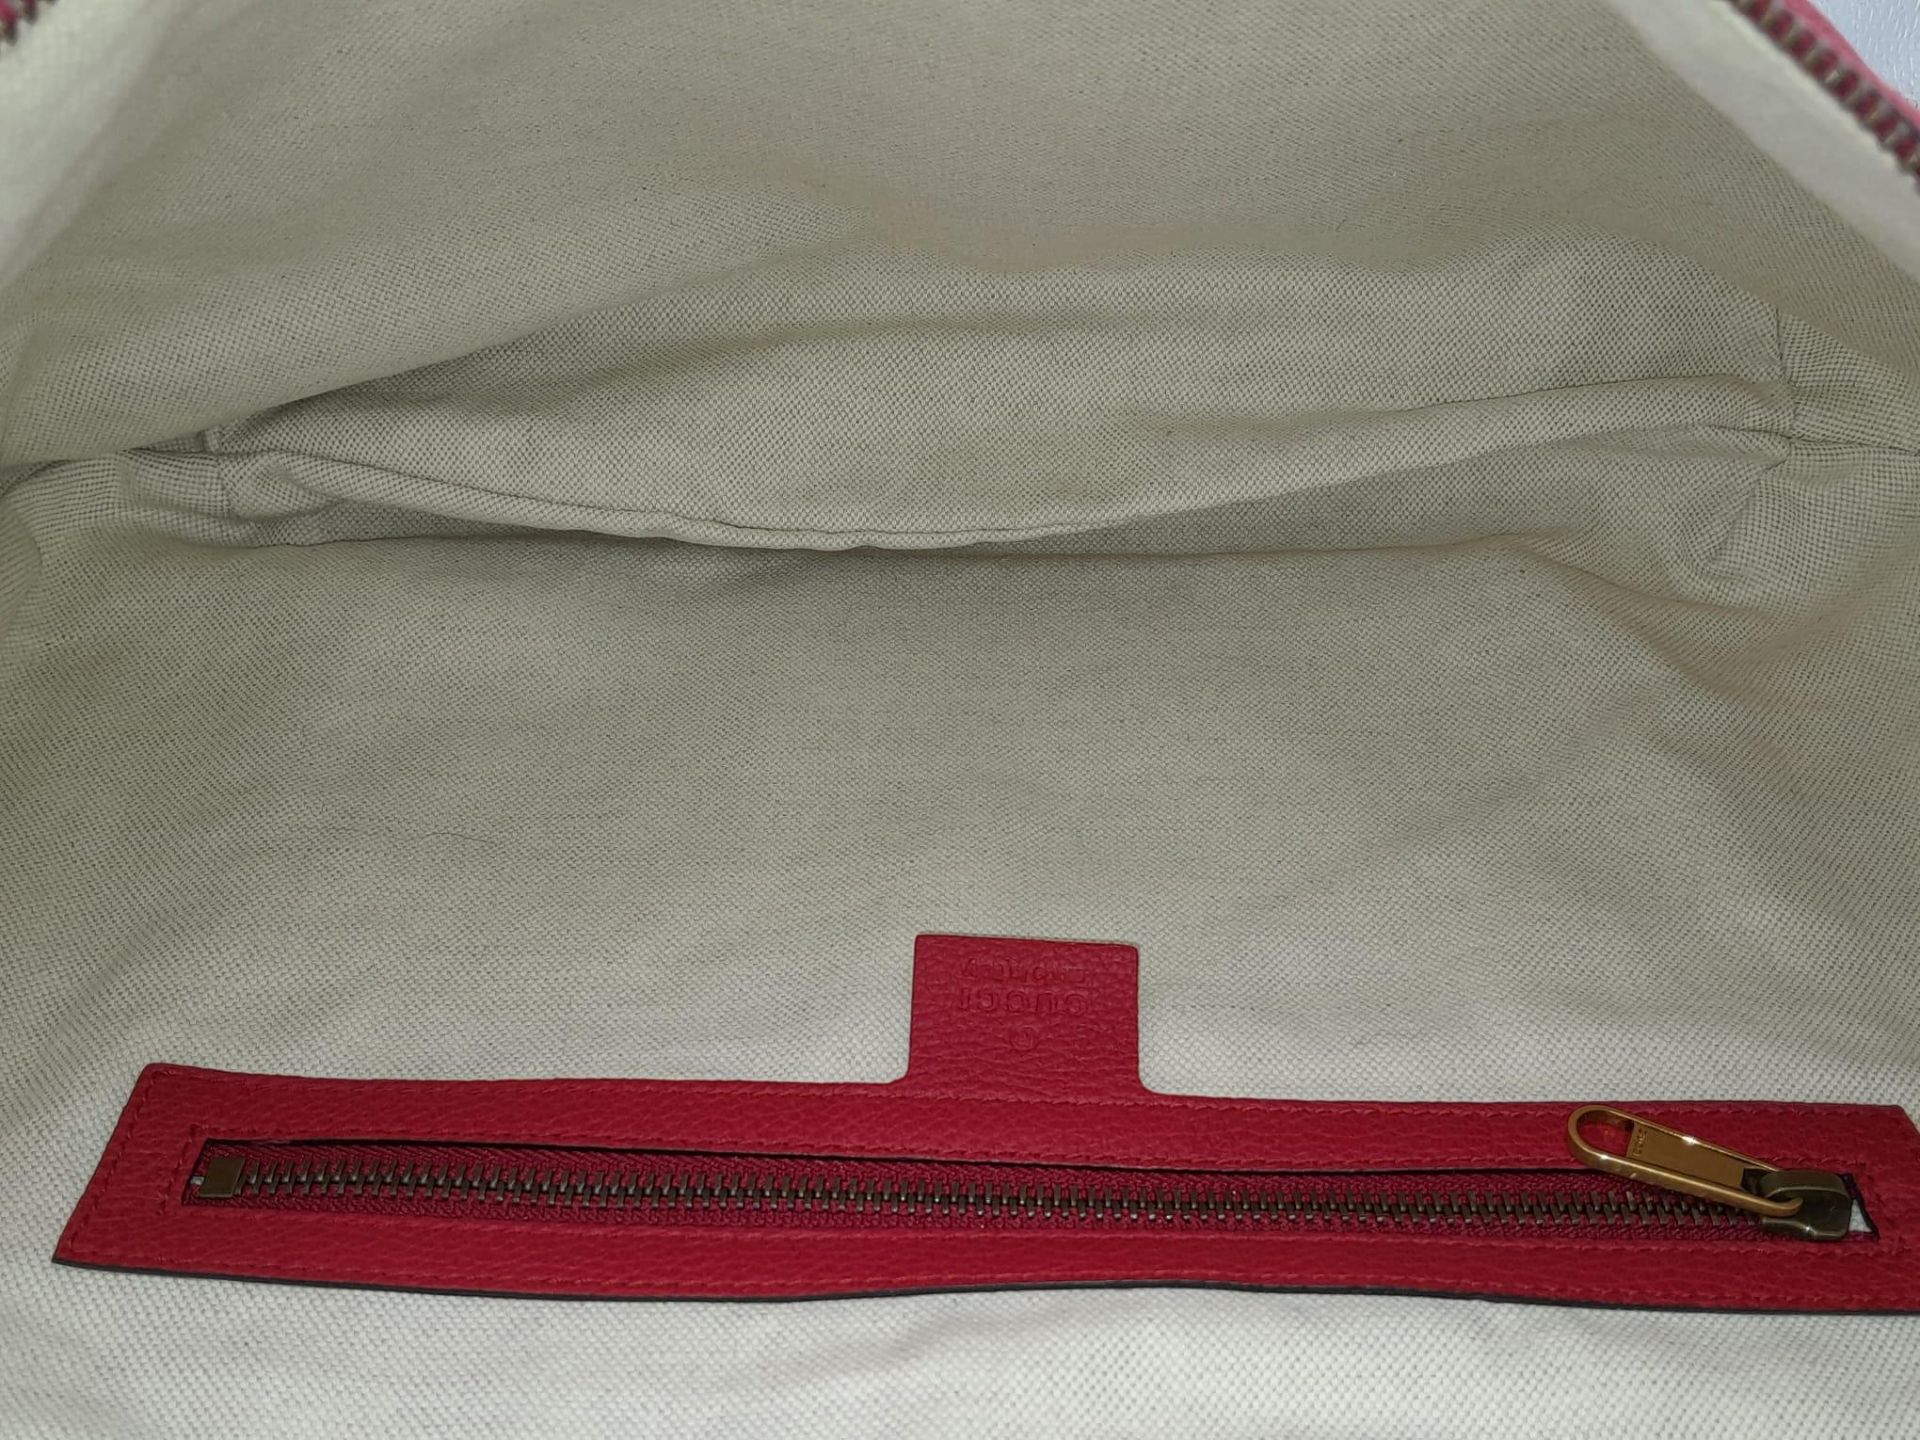 A Gucci Red Logo Shoulder Bag. Leather exterior with gold-toned hardware, adjustable strap and - Image 5 of 9